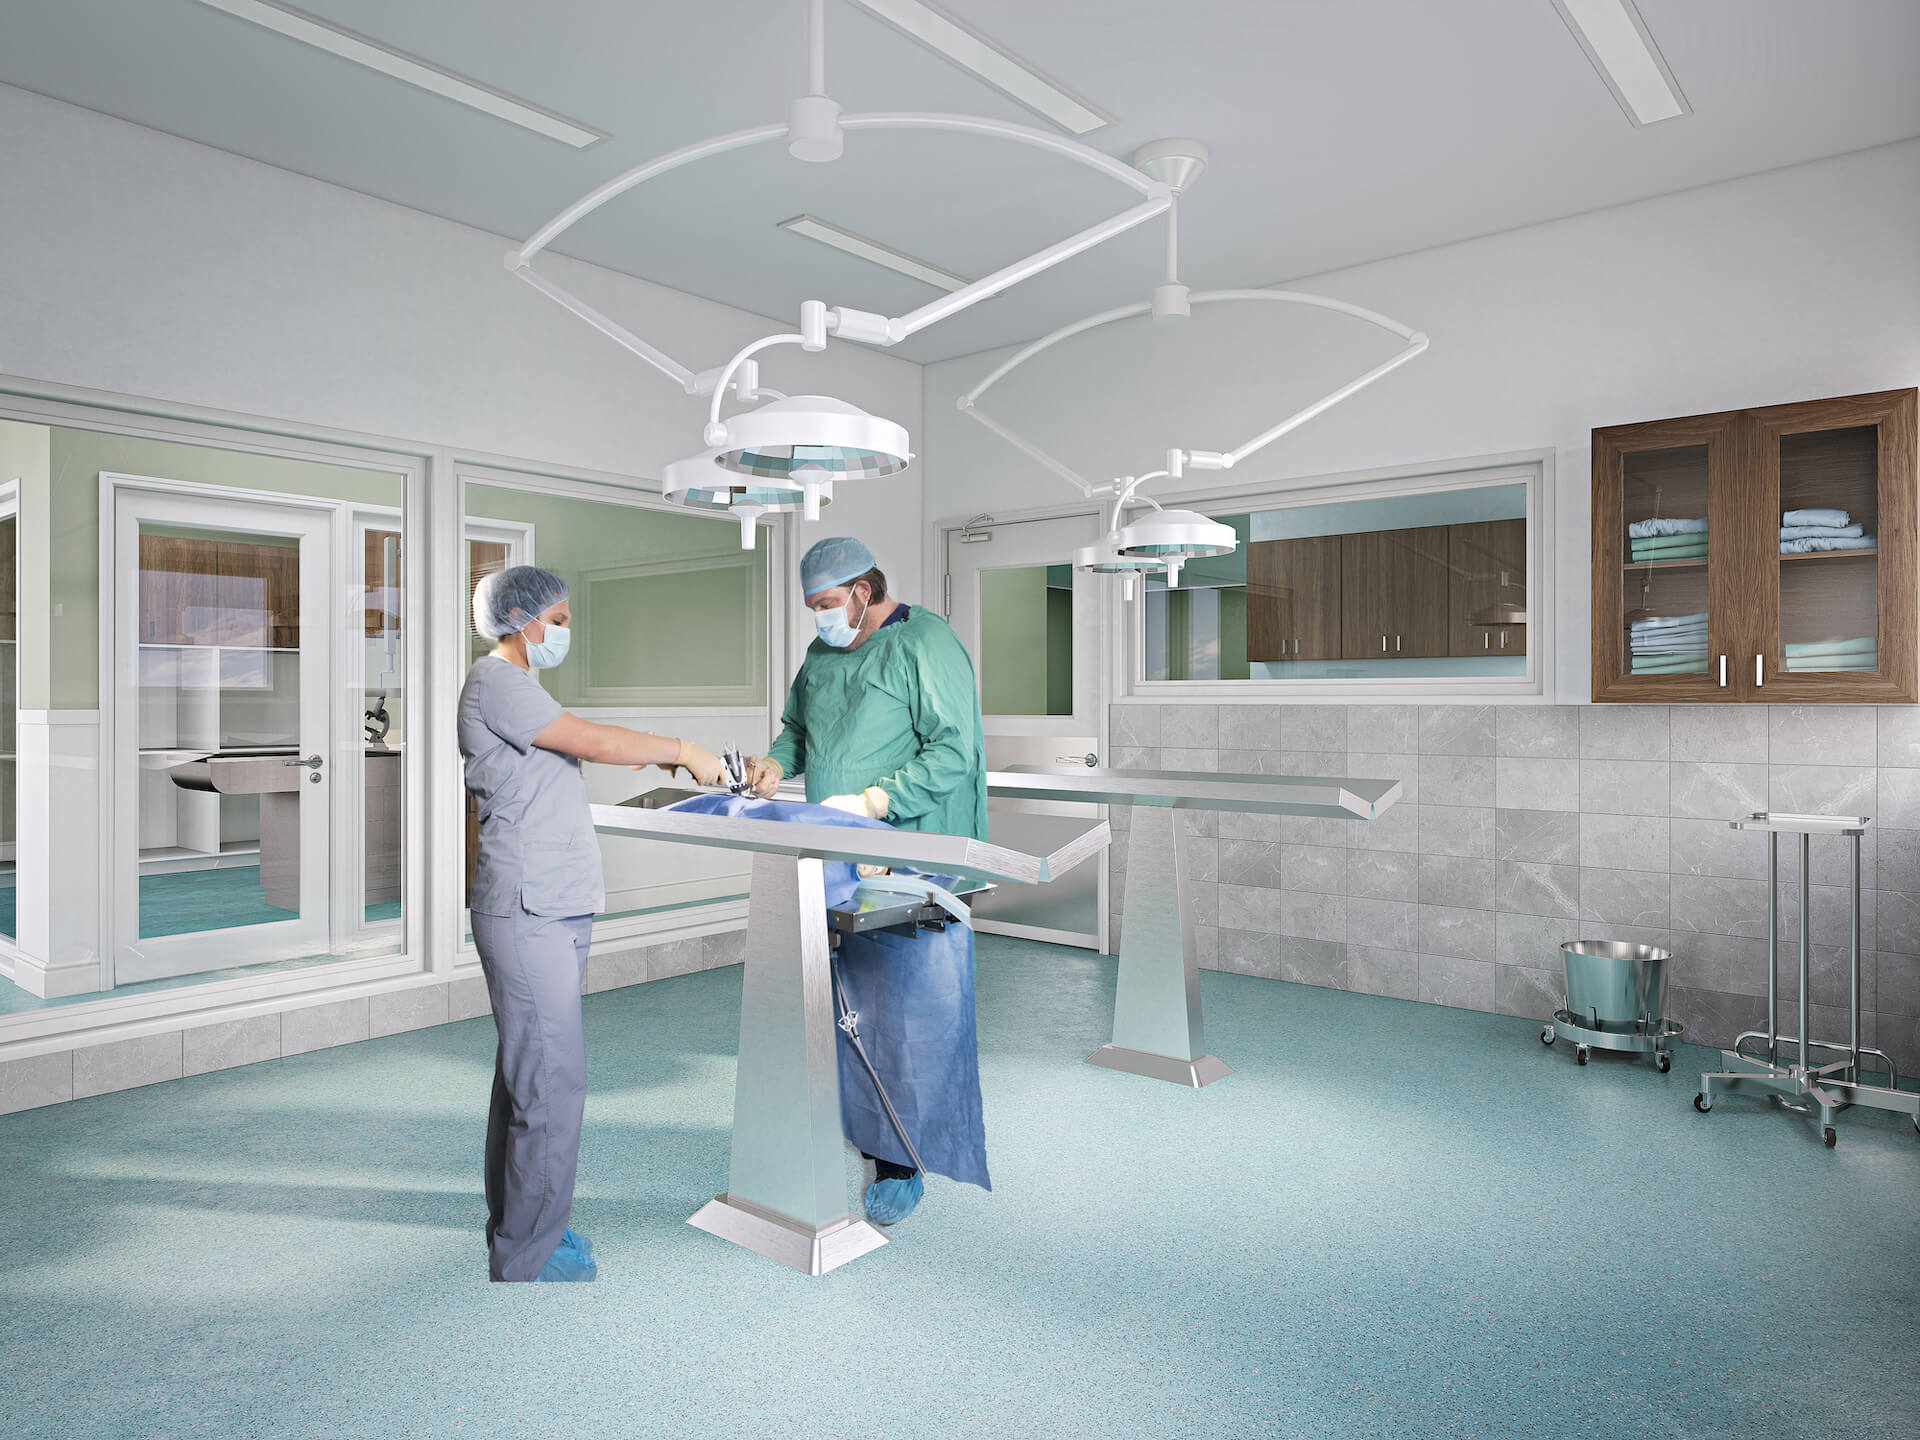 First Draft of Surgery Room CG Image with Doctors